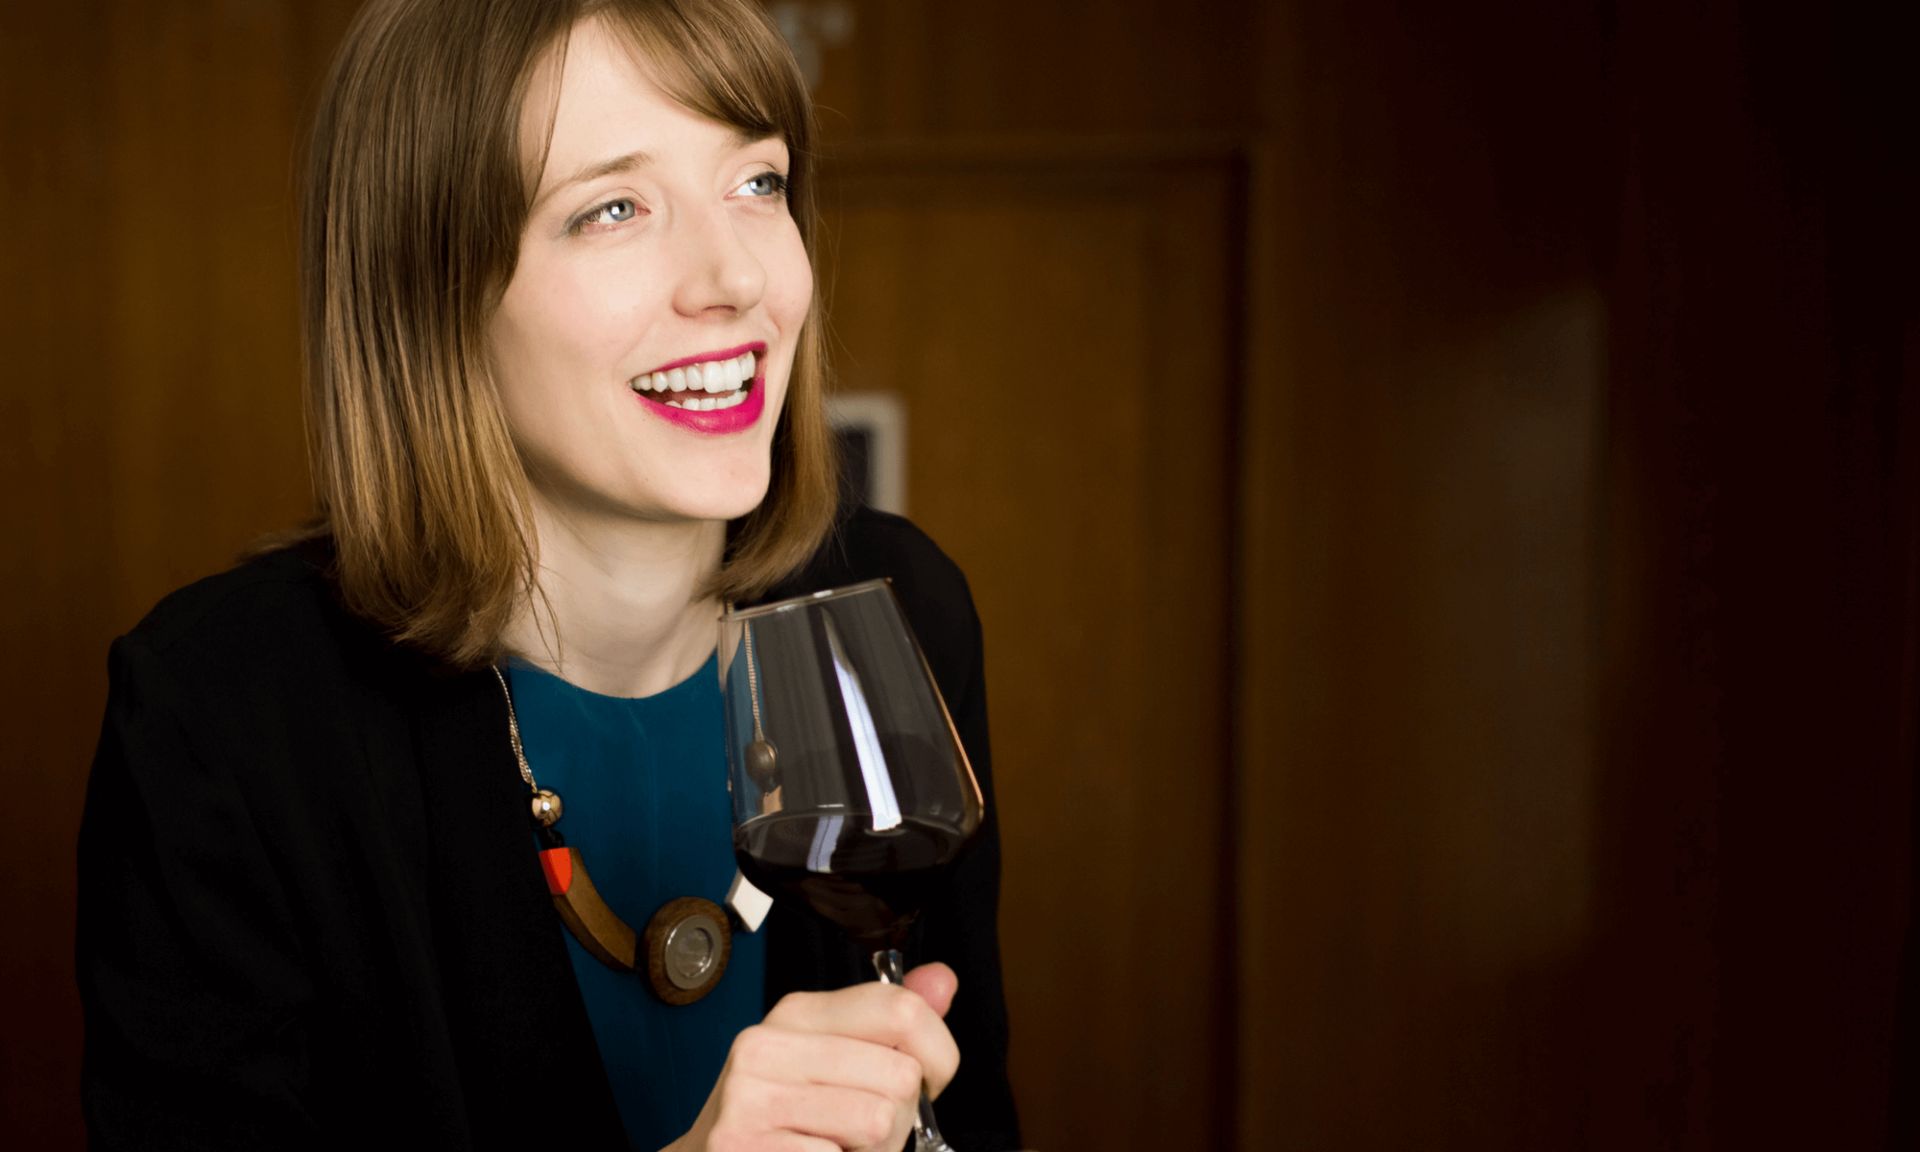 Anna holding a full wine glass and smiling